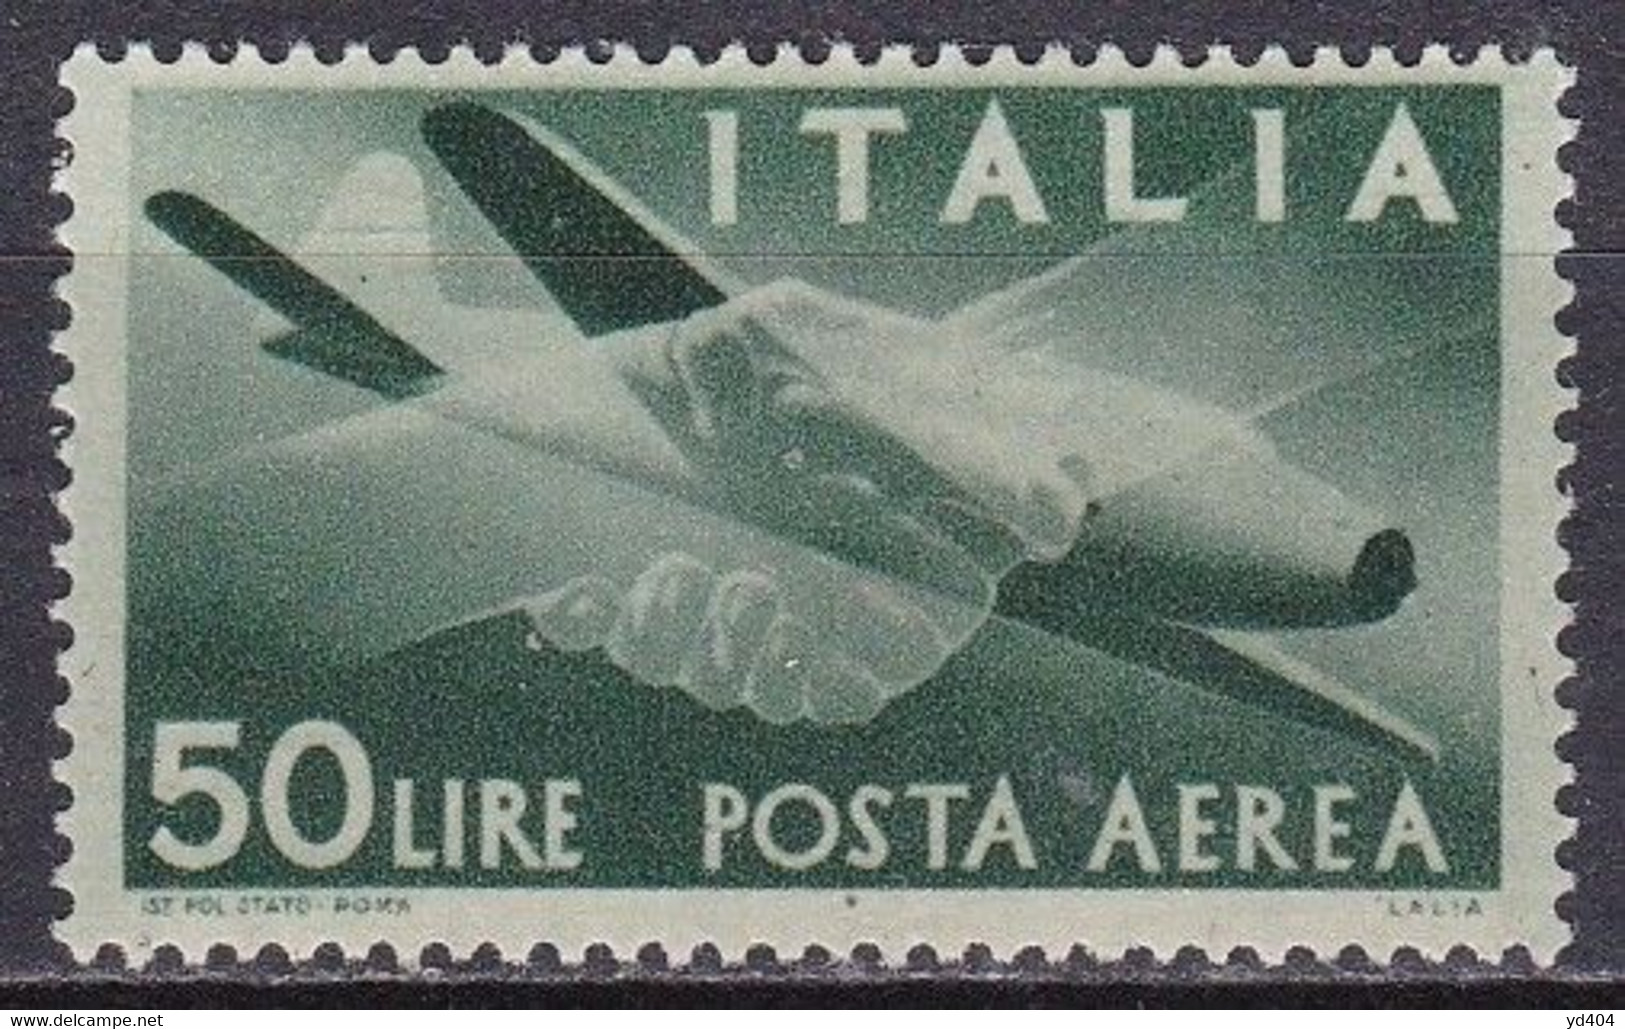 IT125 – ITALY - ITALIE – AIRMAIL – 1947 – CLAPS HANDS & PLANE – SG # 677 MVLH 50 € - Correo Aéreo